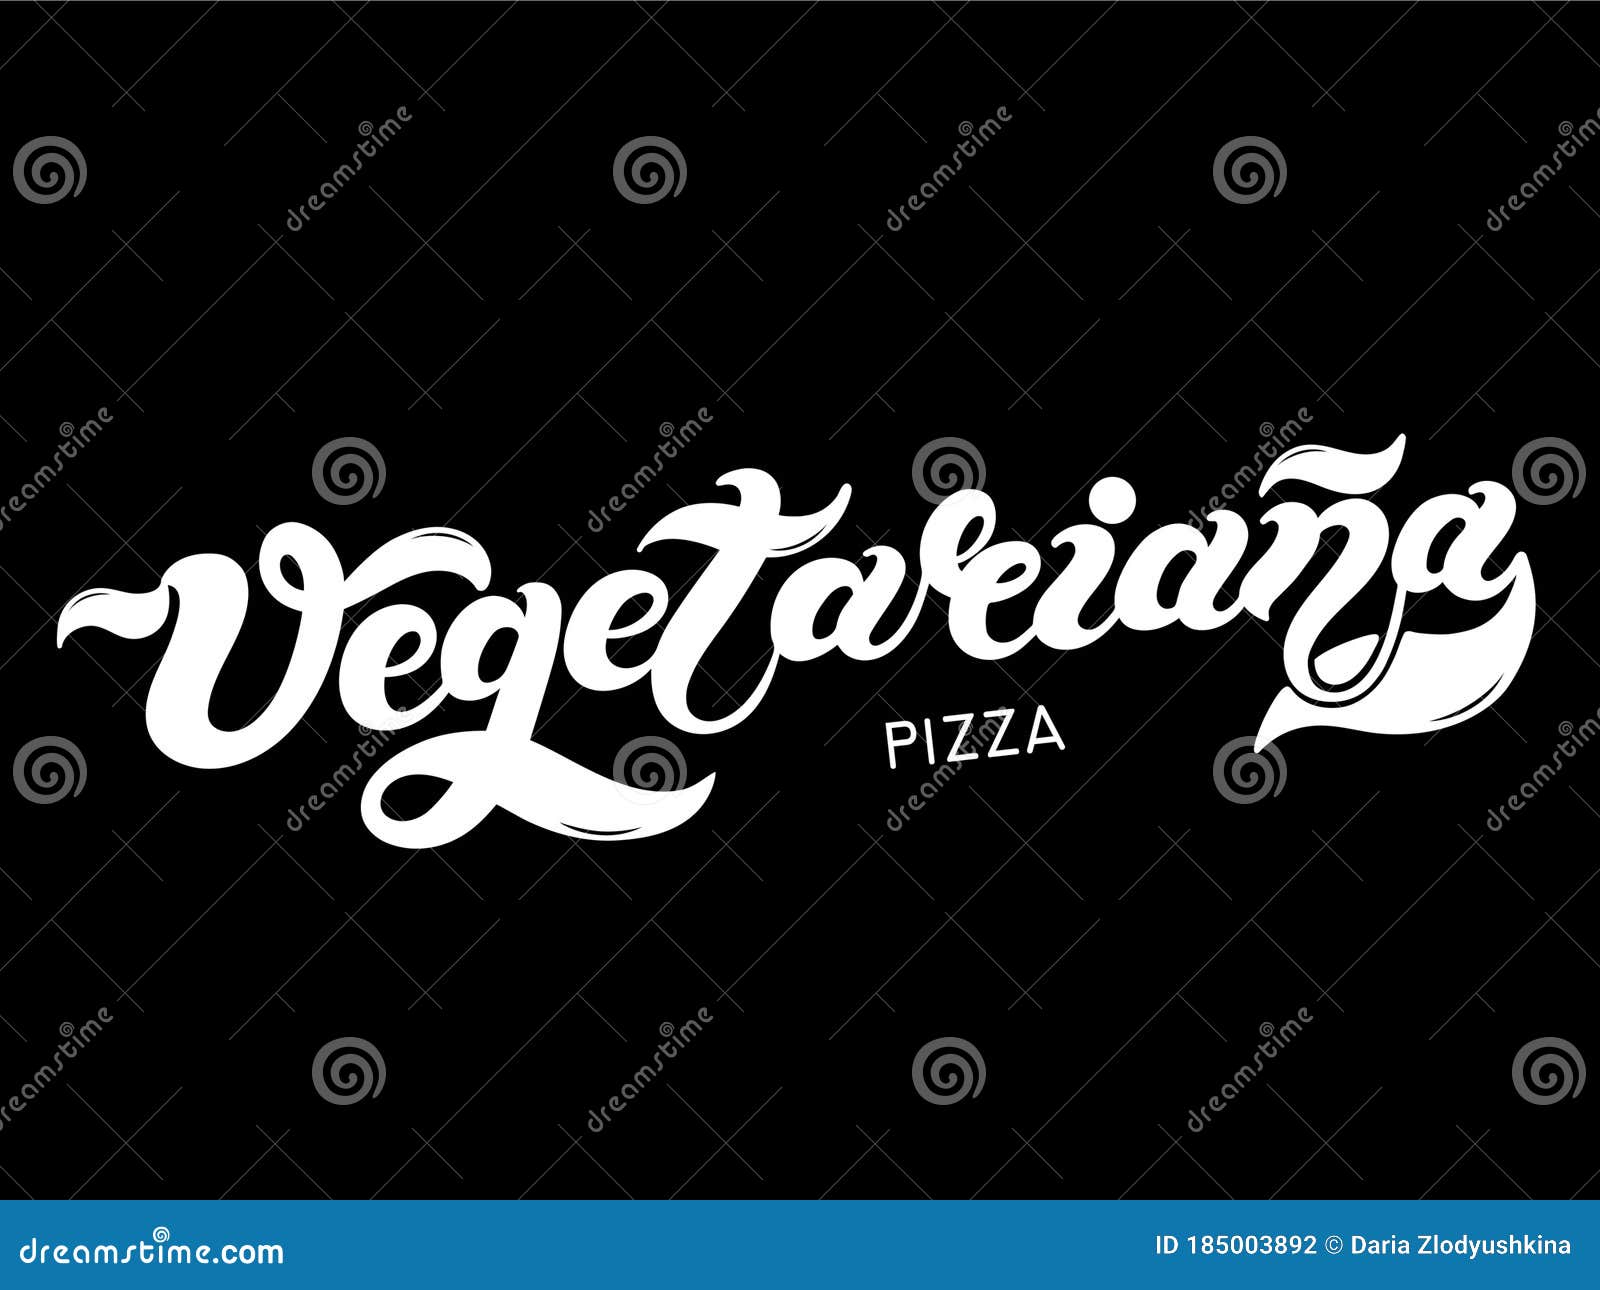 pizza vegetariana. the name of the type of pizza in italian. hand drawn lettering